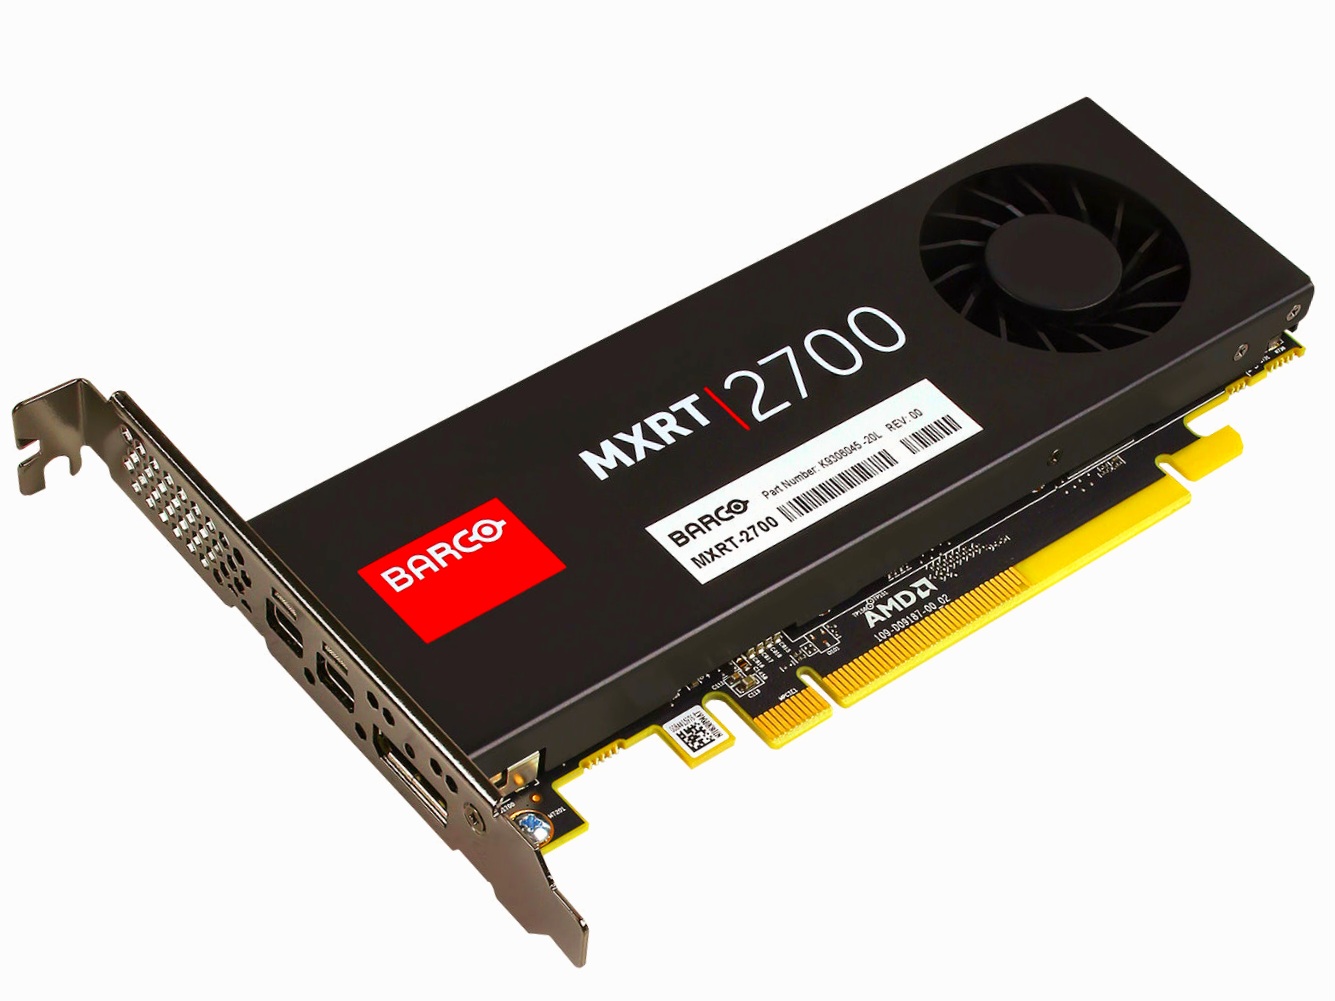 Barco MXRT-2700 K9306045 2GB small form factor display controller GPU Graphics Card - Click Image to Close